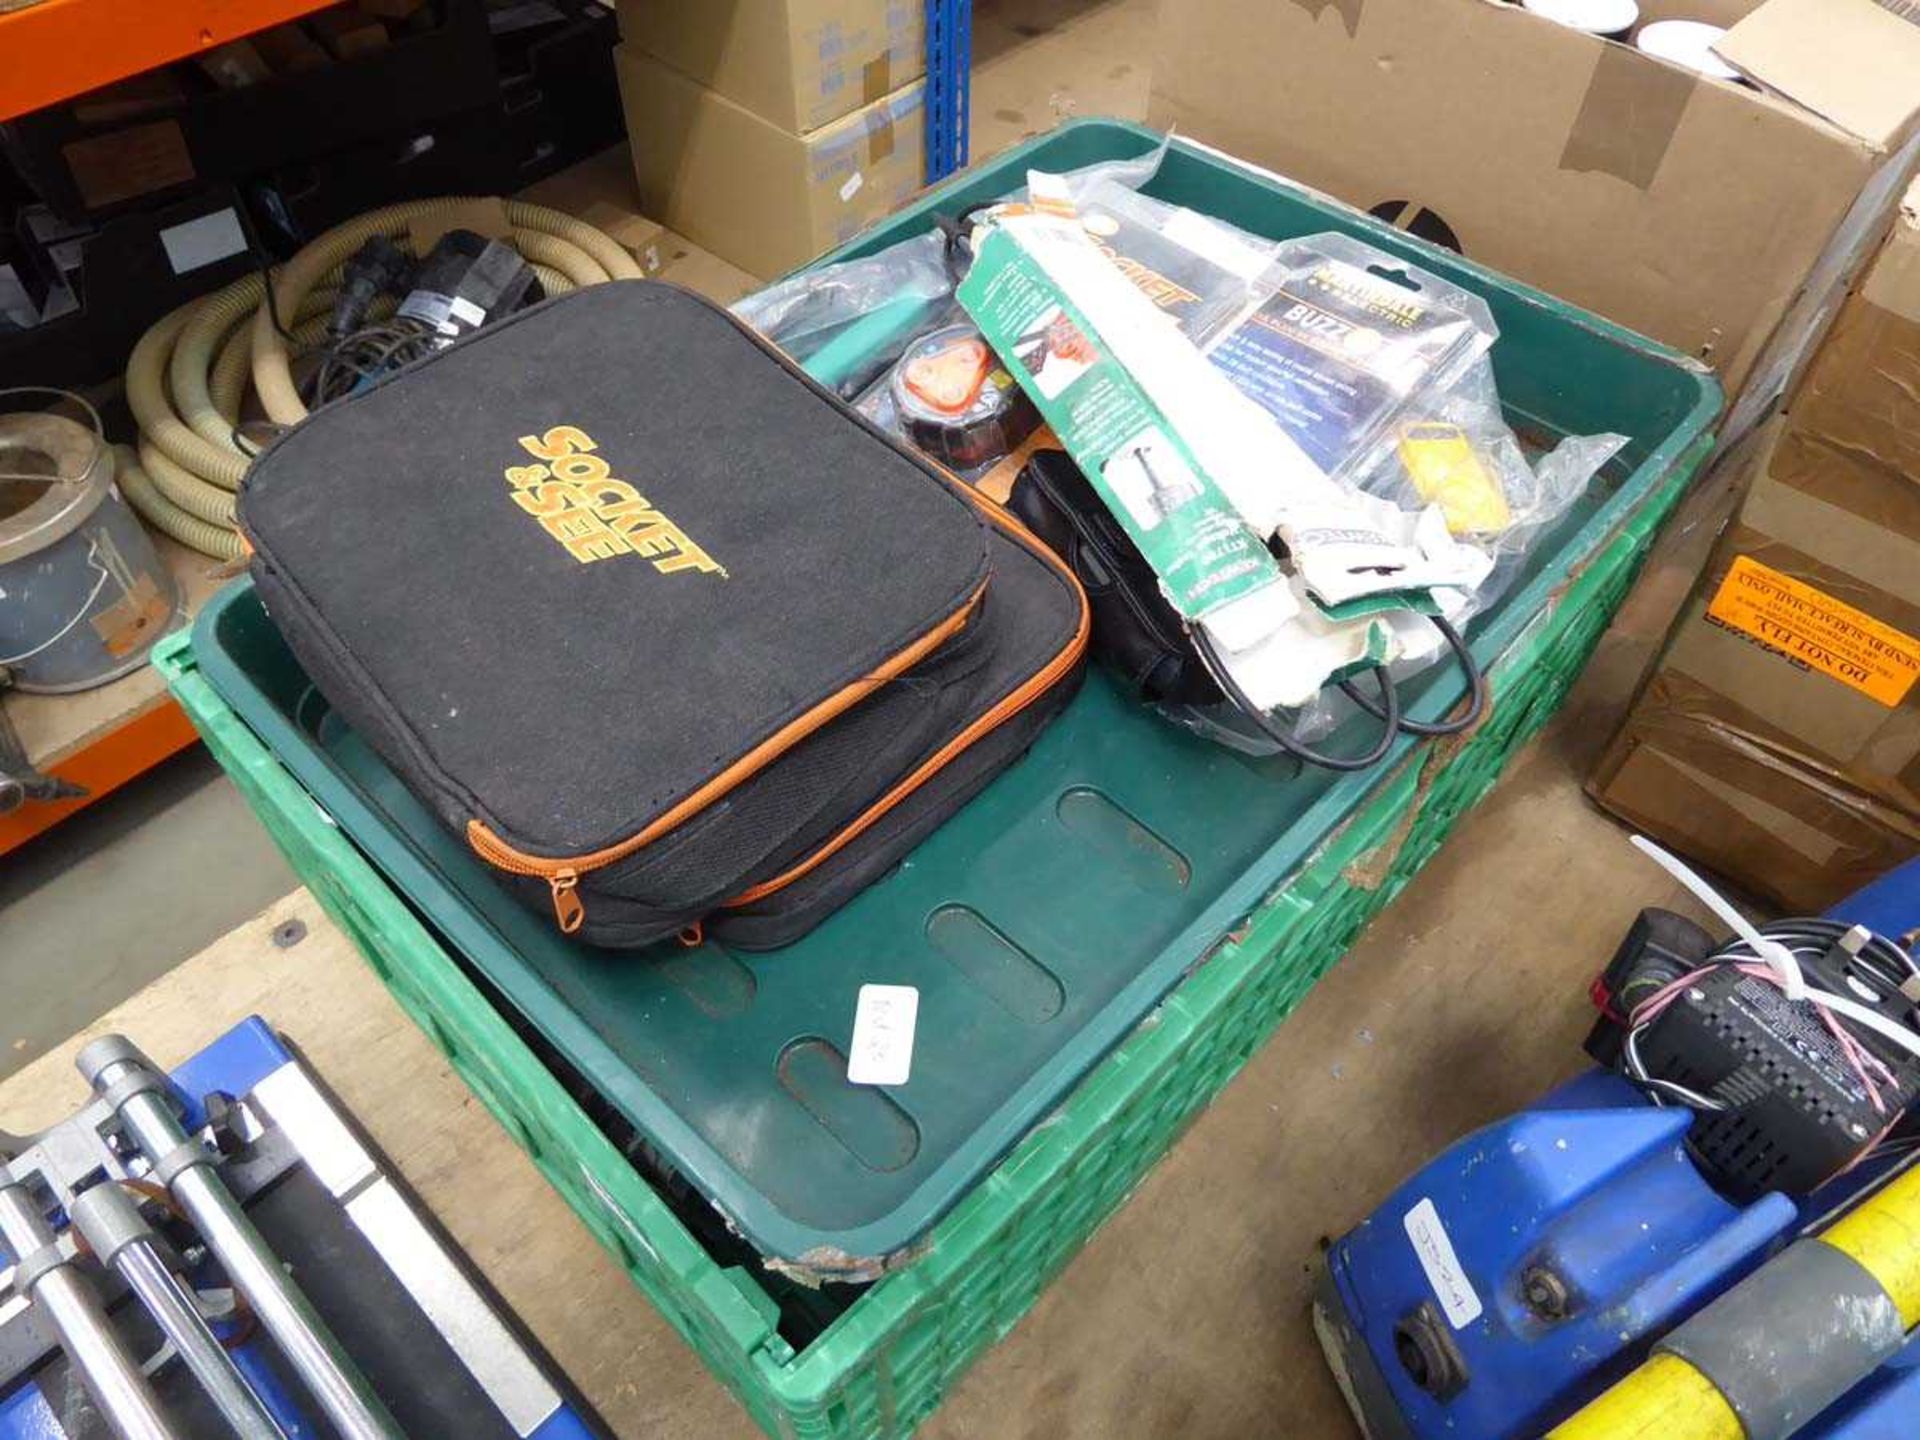 Plastic crate containing power tools and electrical testers